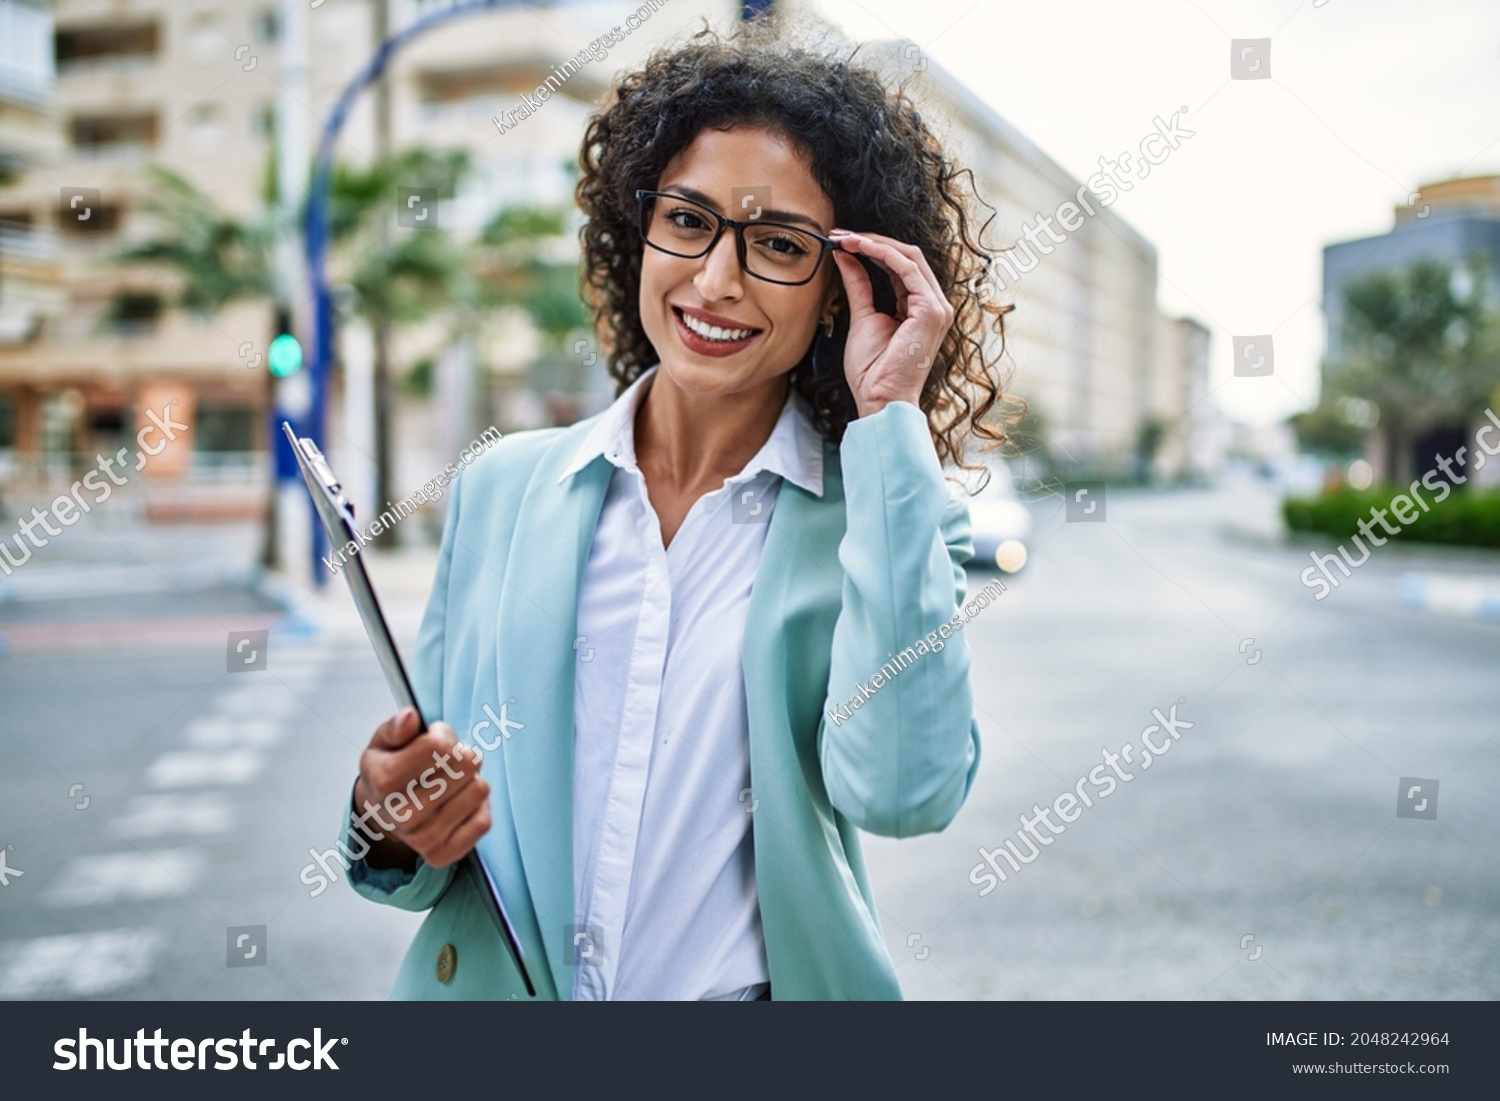 Young hispanic business woman wearing professional look smiling confident at the city holding worker clipboard #2048242964